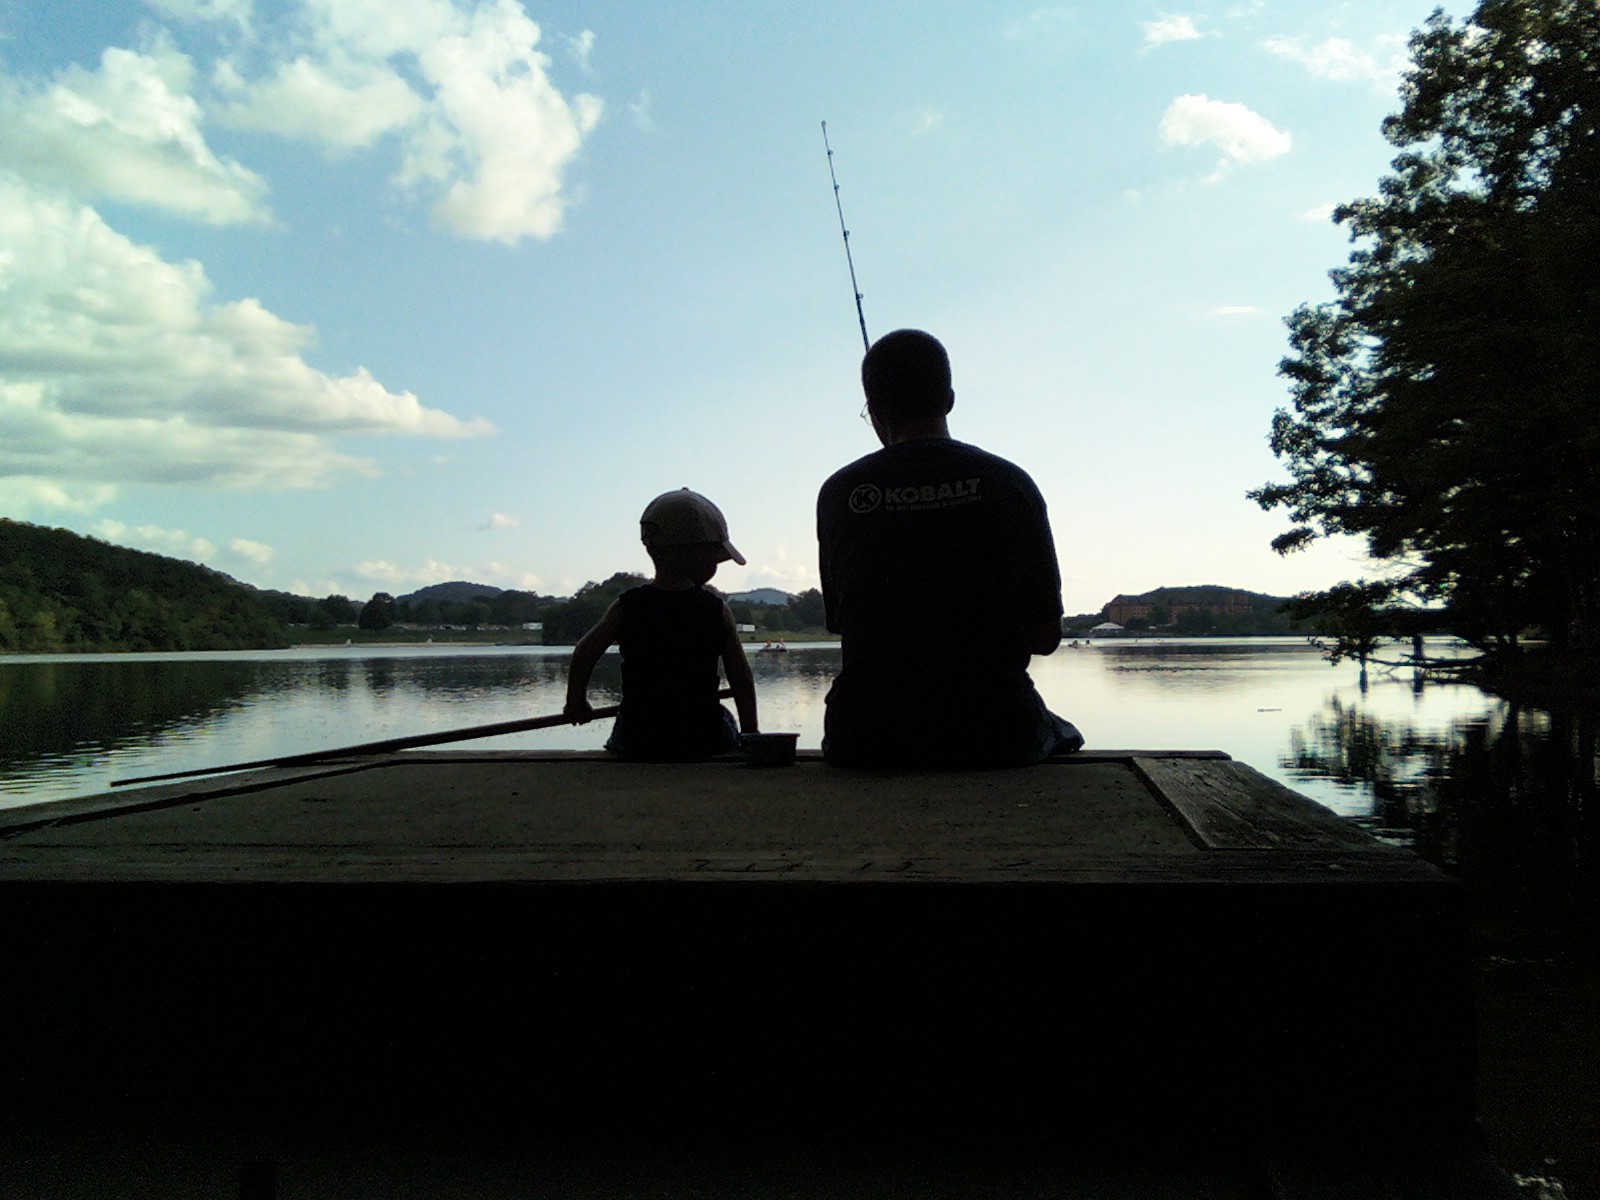 http://www.johndwyerbooks.com/wp-content/uploads/2016/12/father-and-son-fishing.jpg